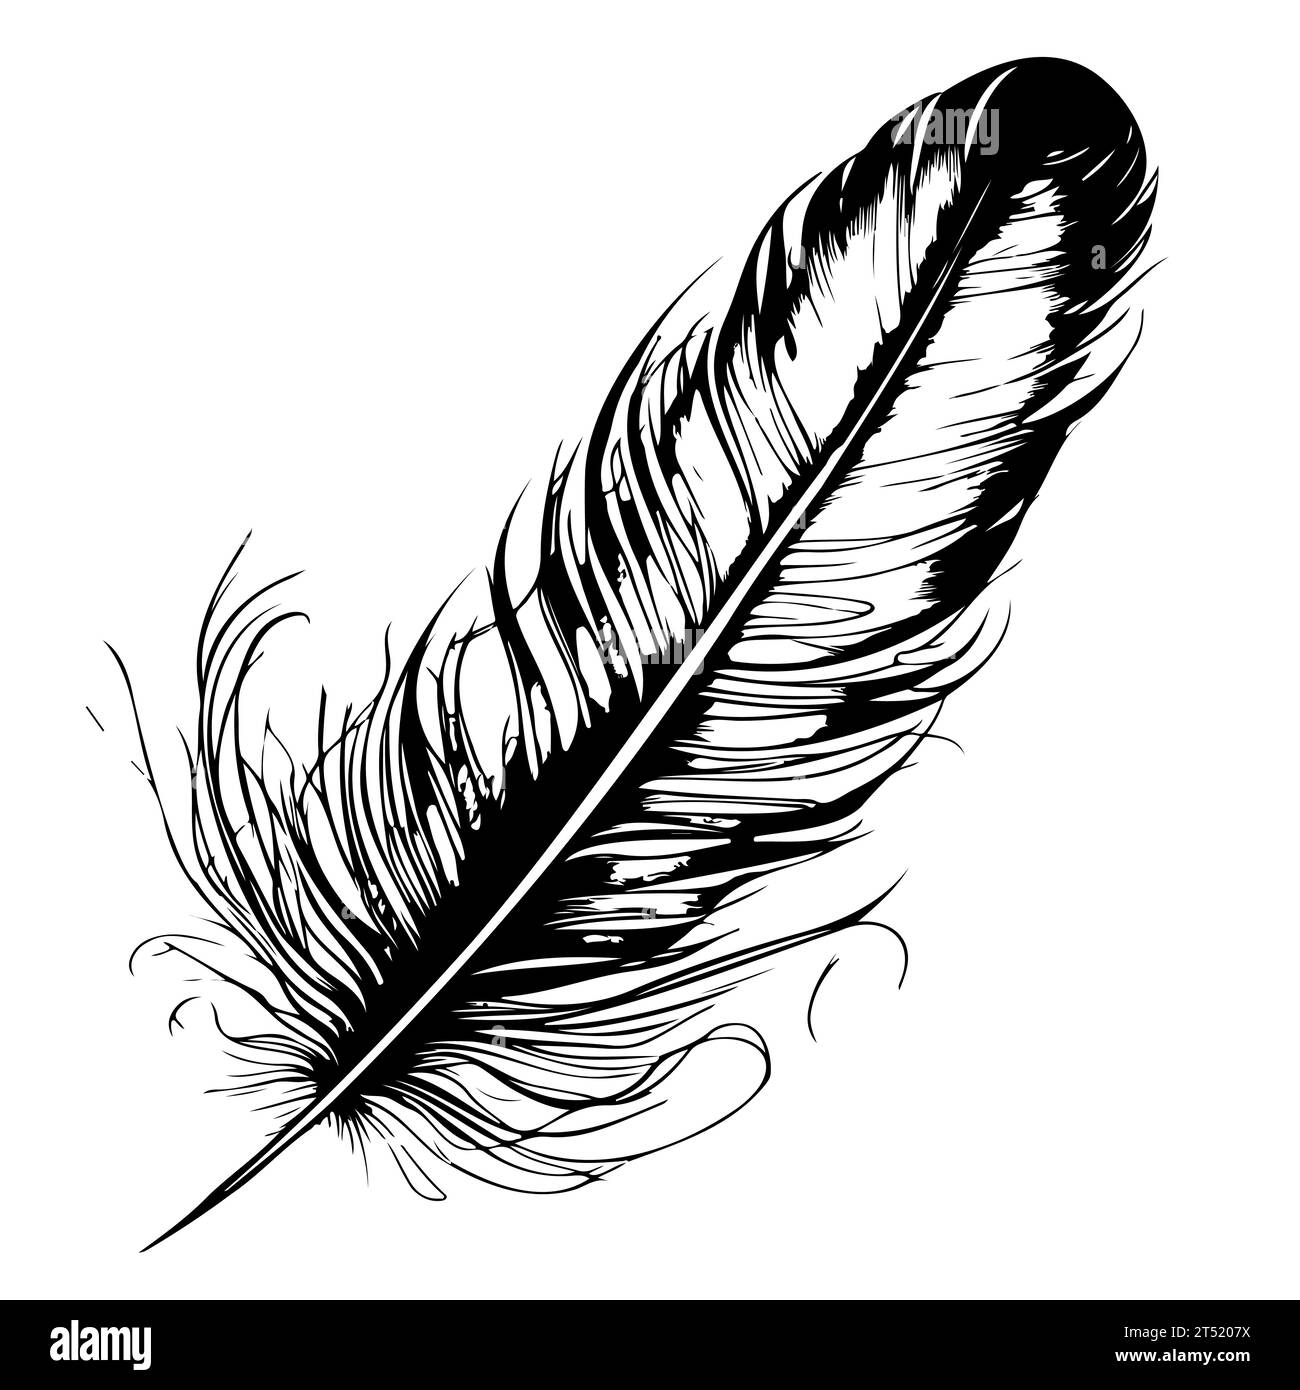 bird feather. Hand drawn illustration converted to vector. Outline with ...